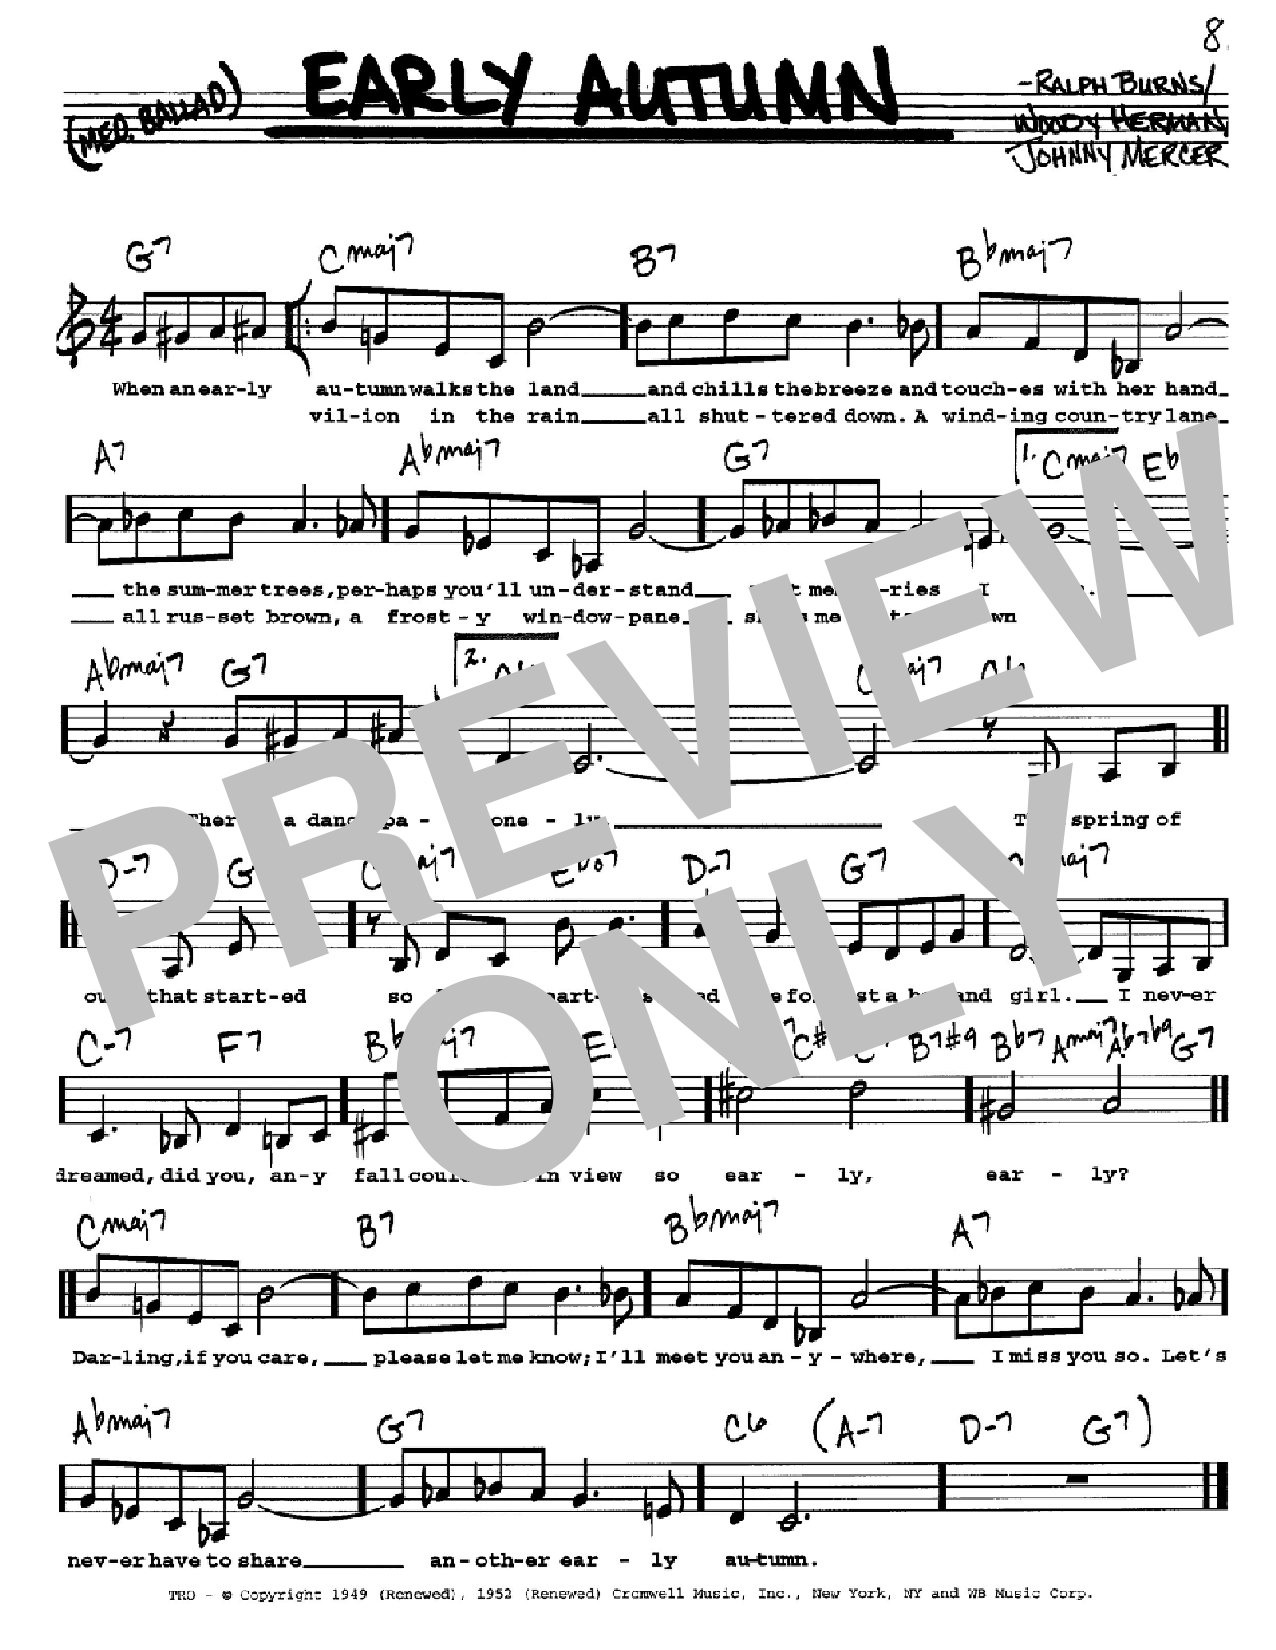 Download Woody Herman Early Autumn Sheet Music